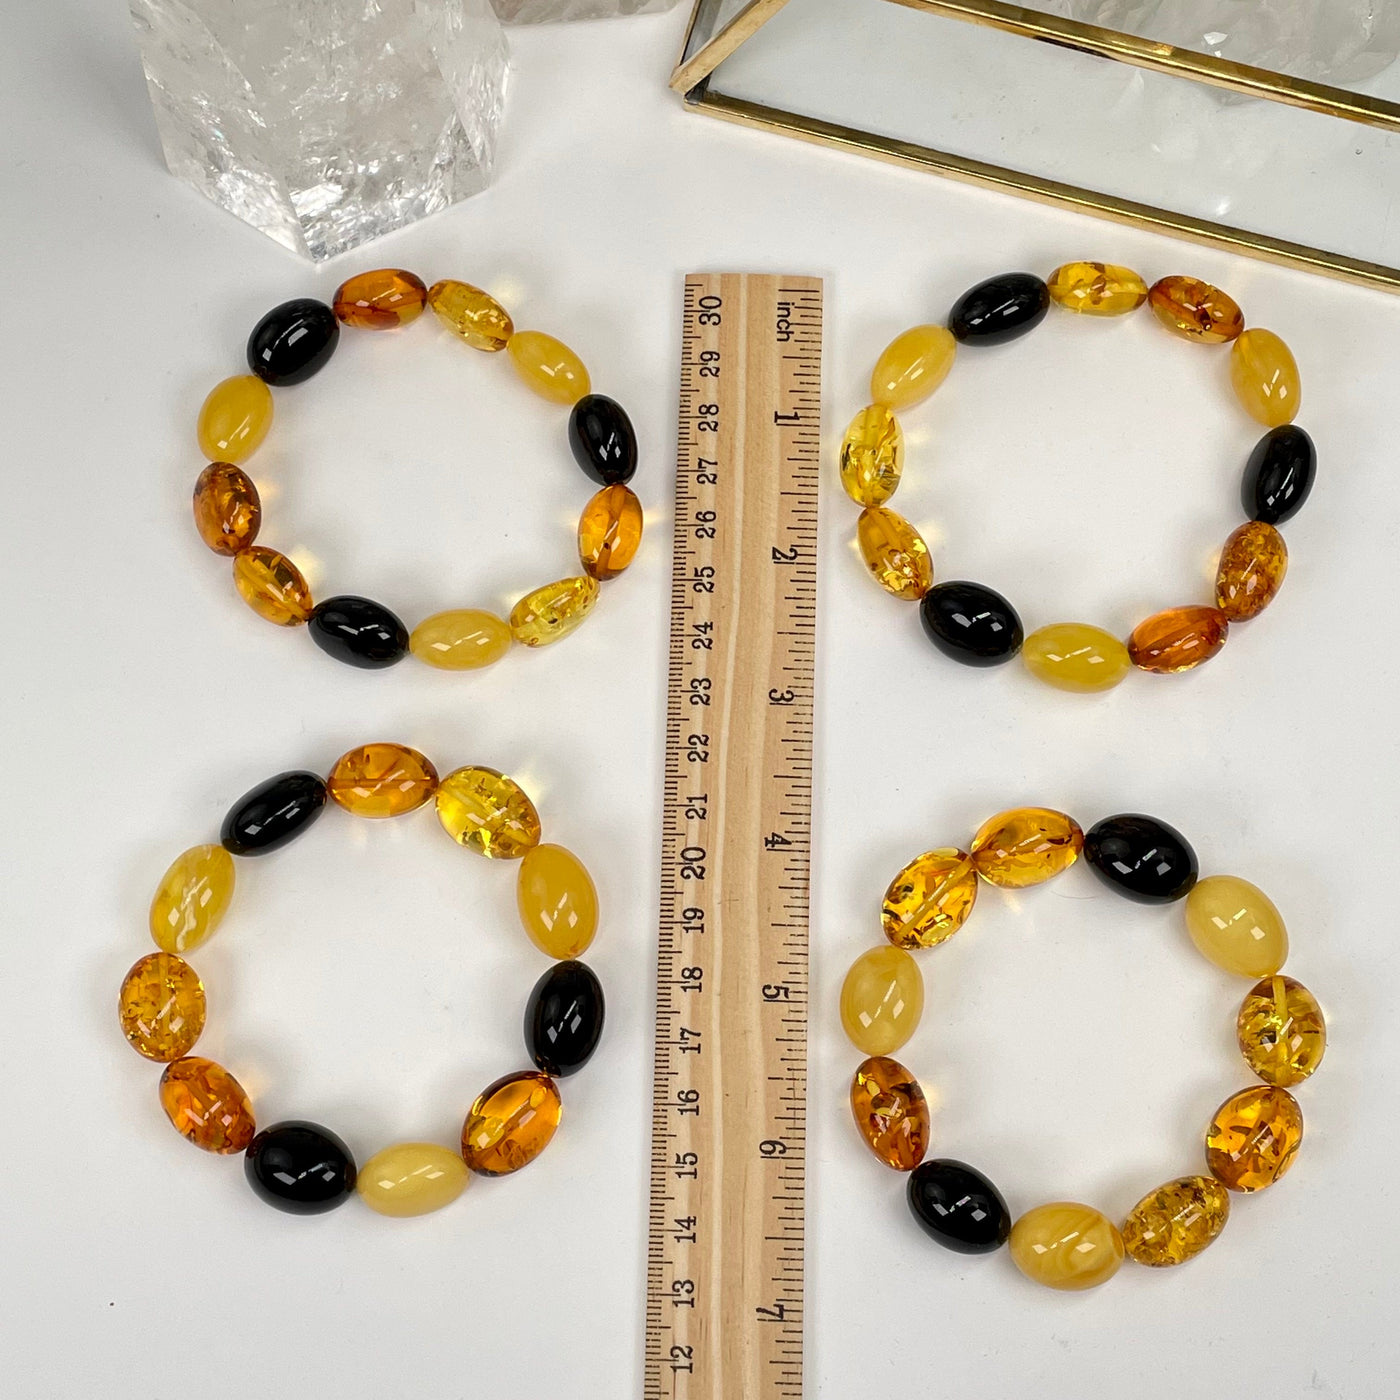 amber bracelets next to a ruler for size reference 